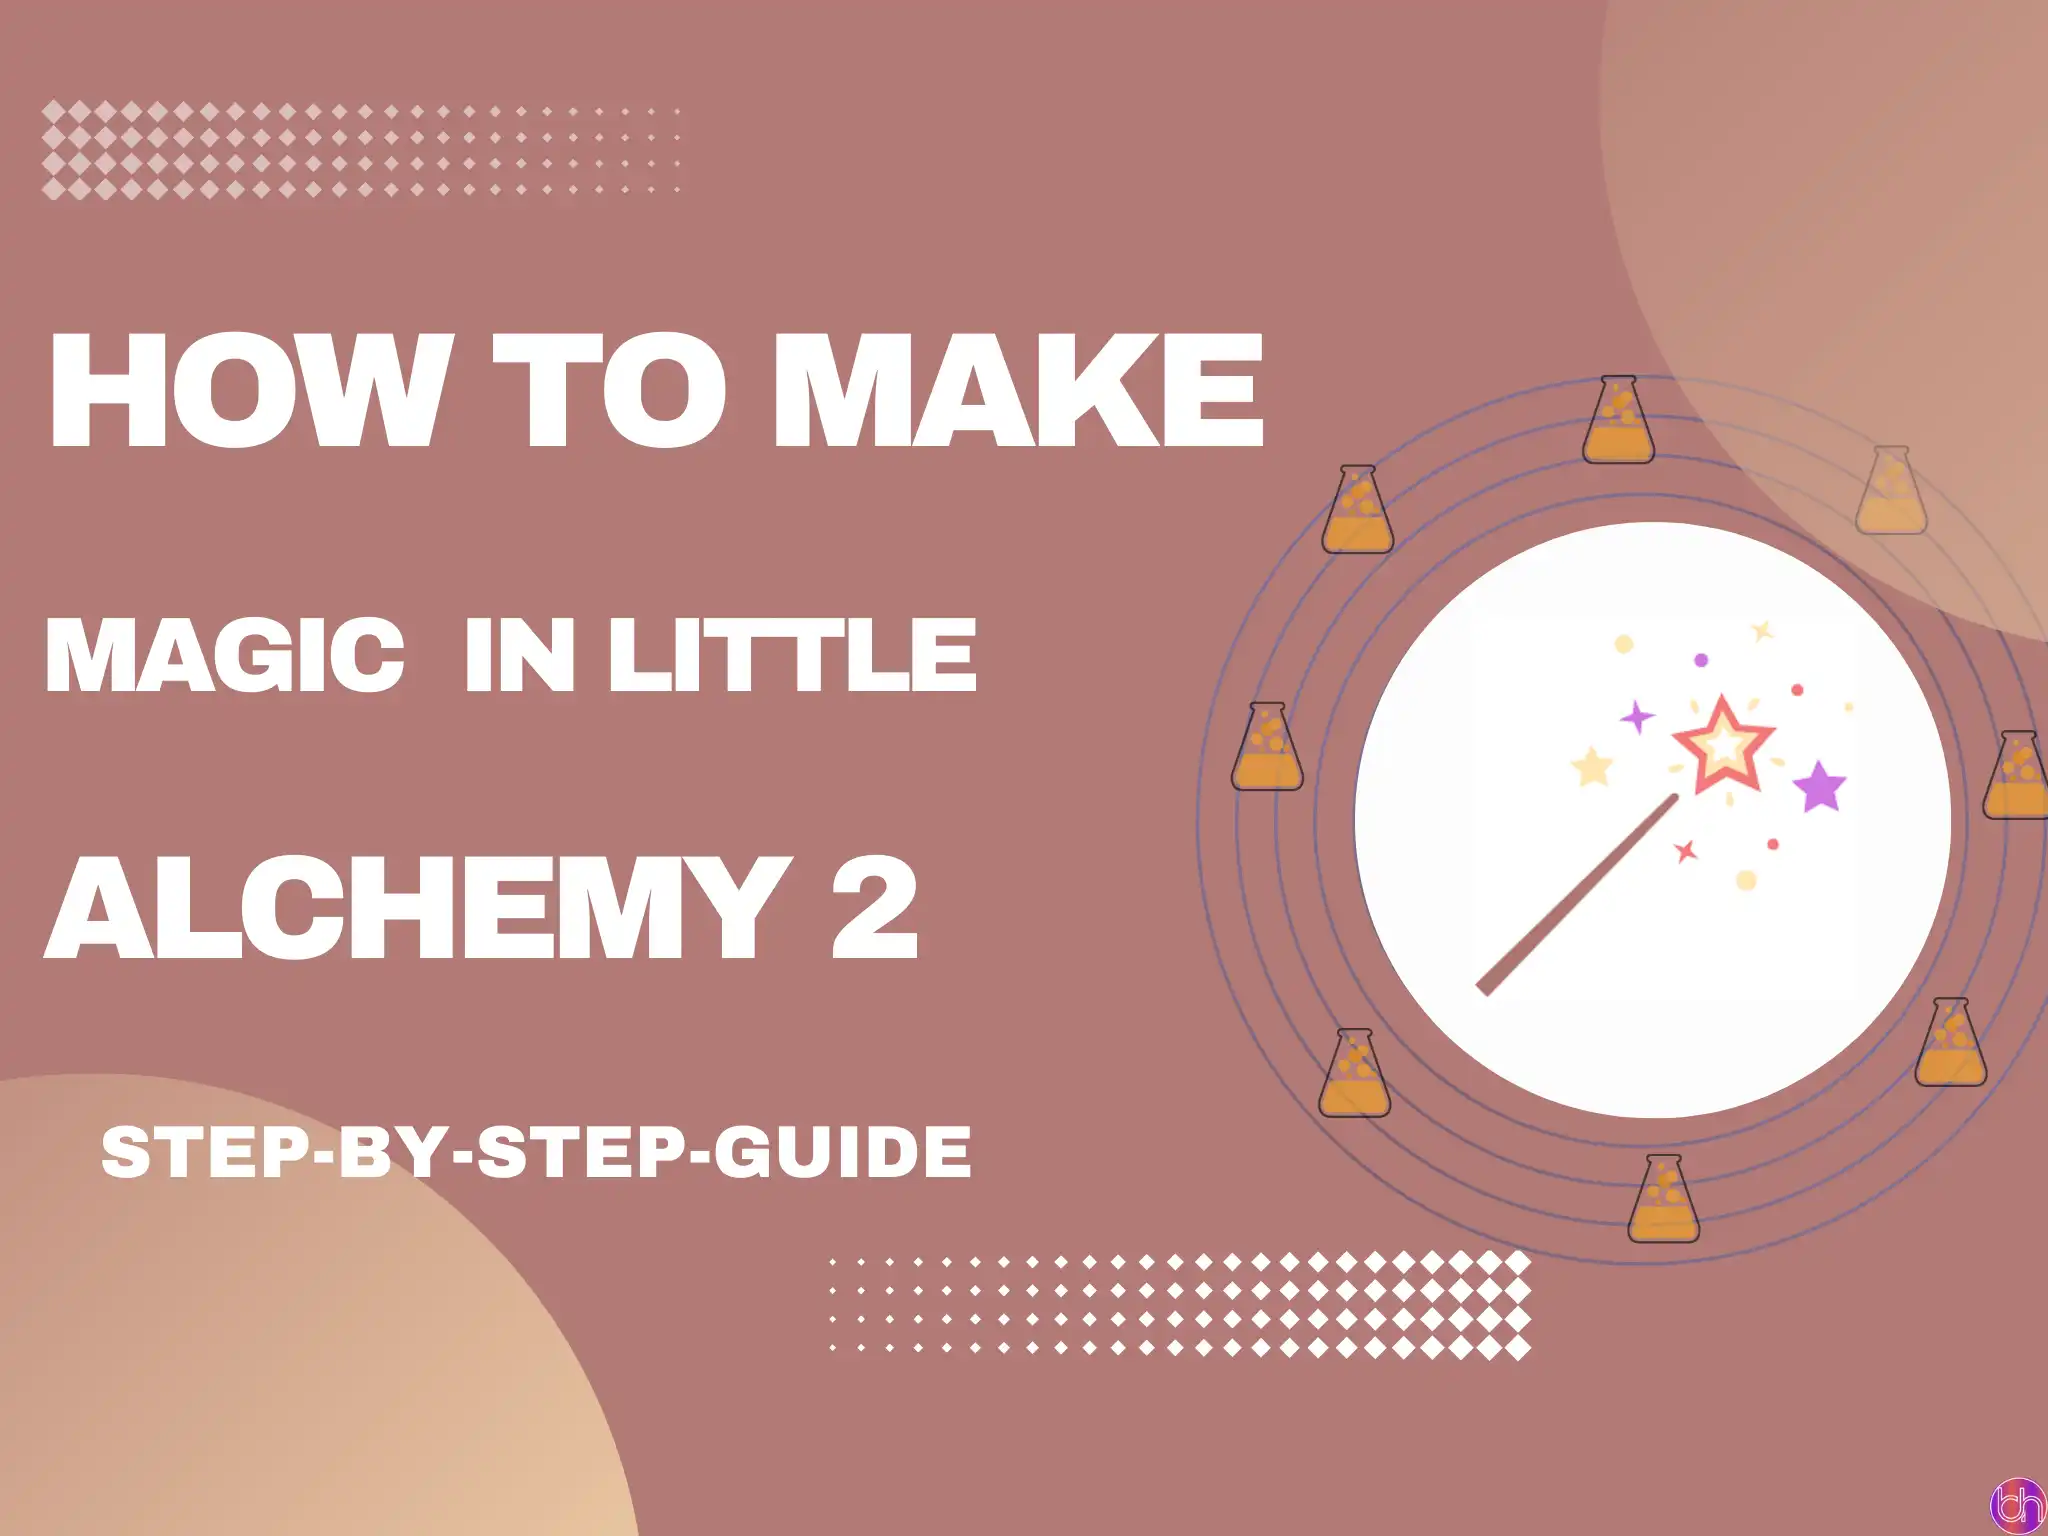 How to make Magic in Little Alchemy 2